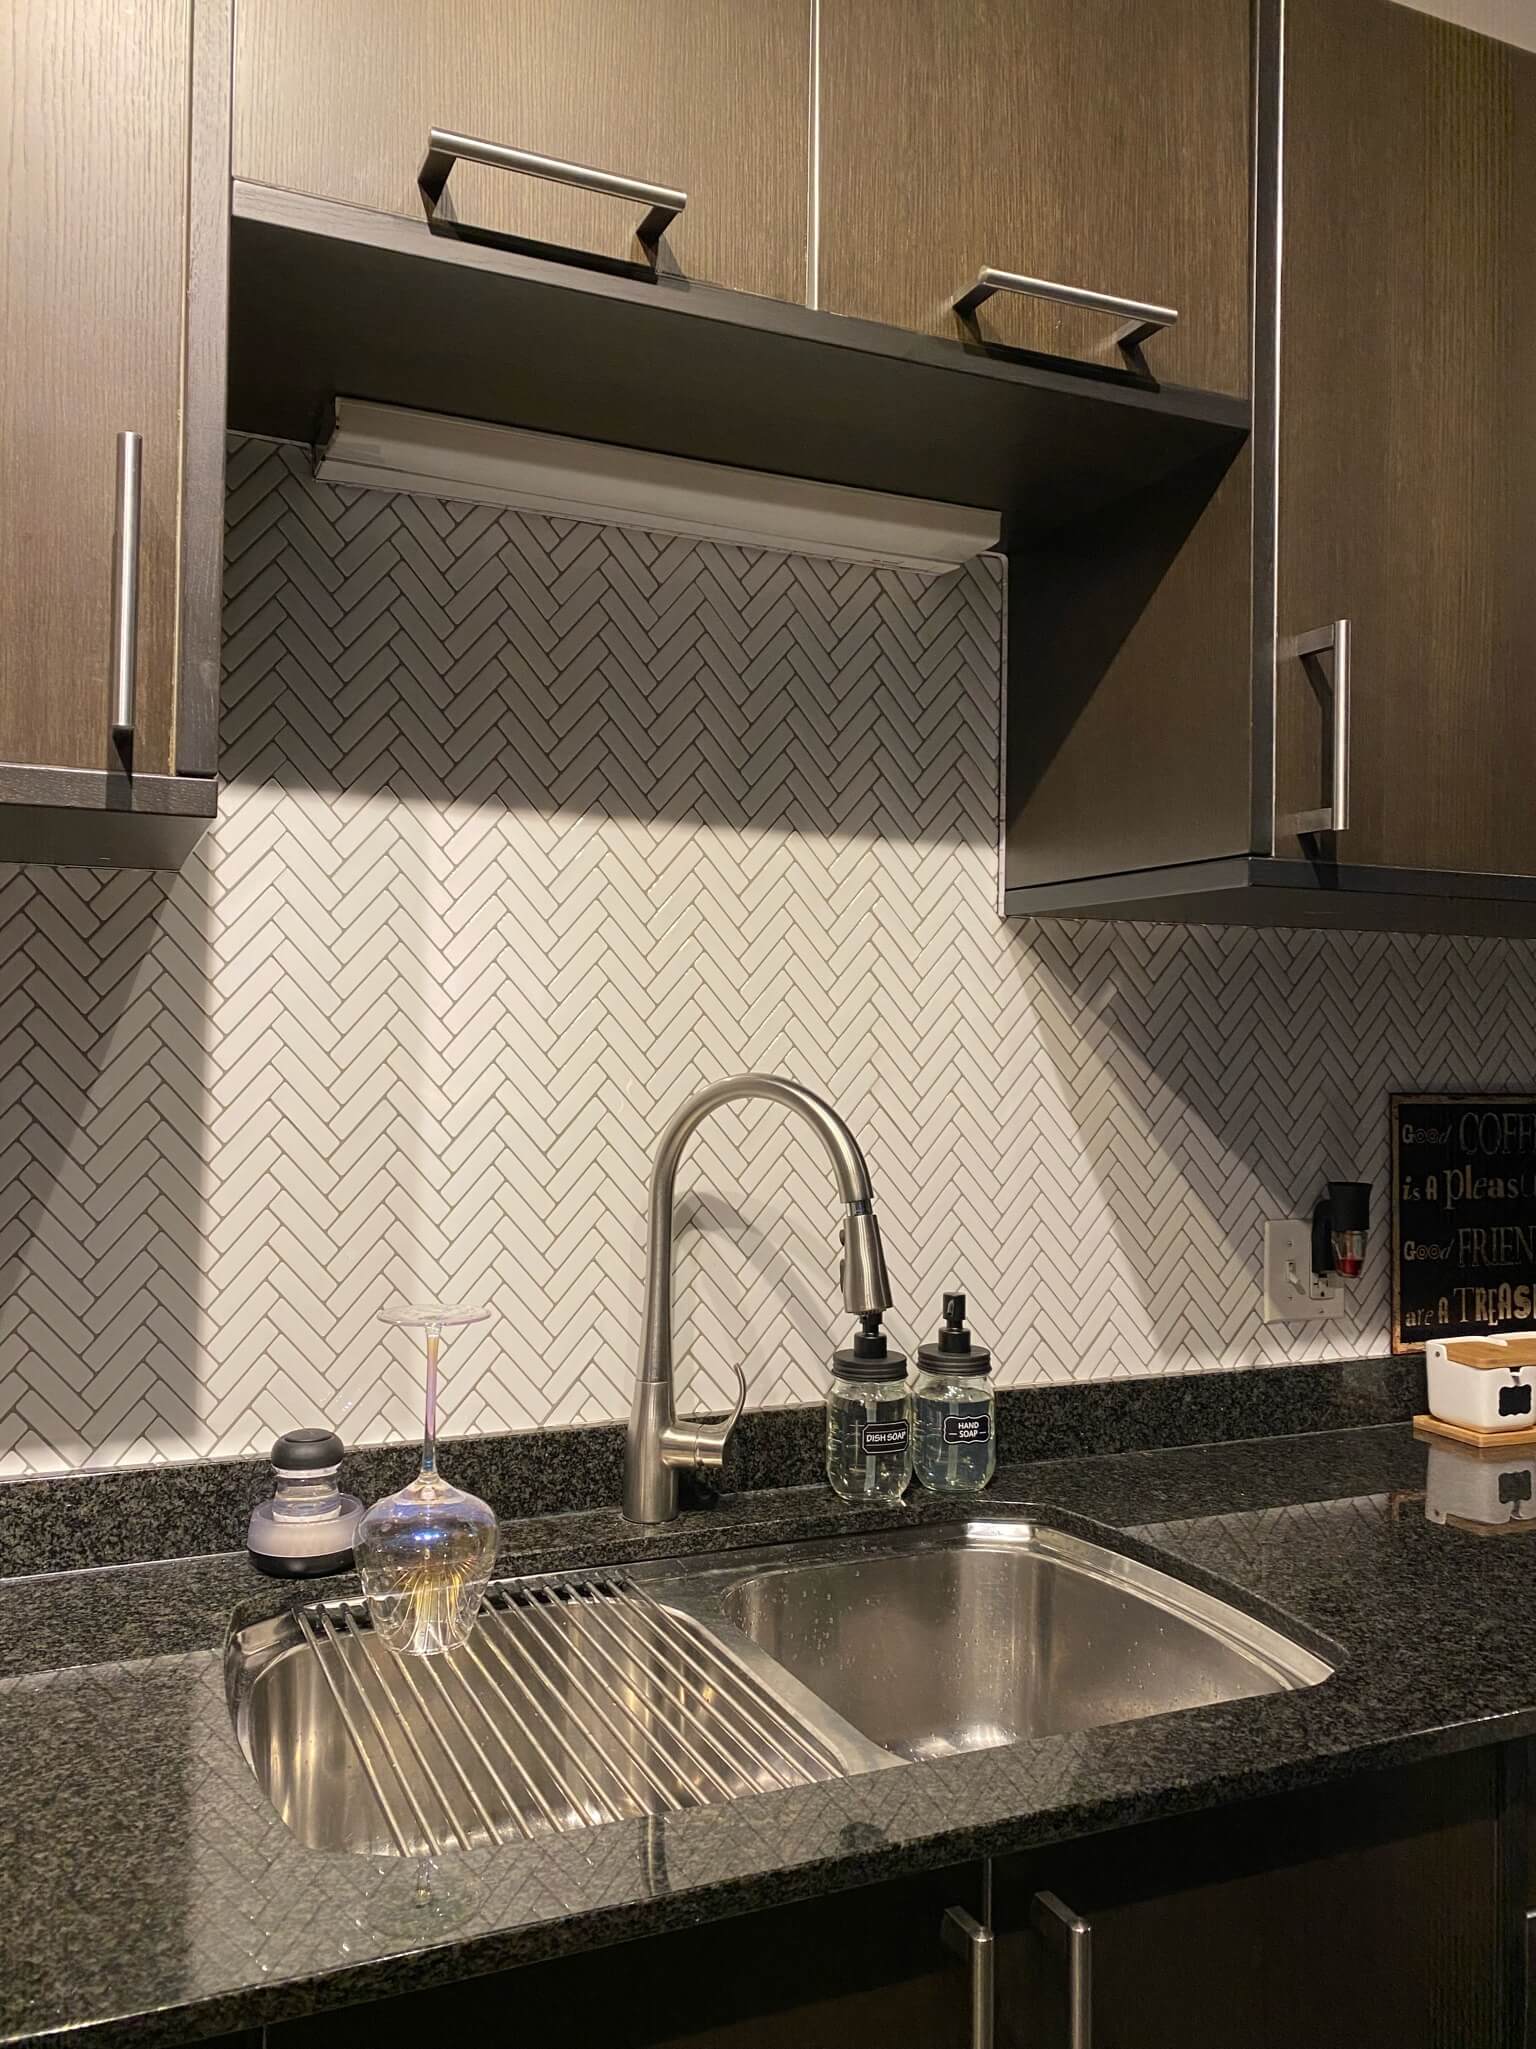 How To Do Inexpensive Peel-and-Stick Kitchen Backsplash Now